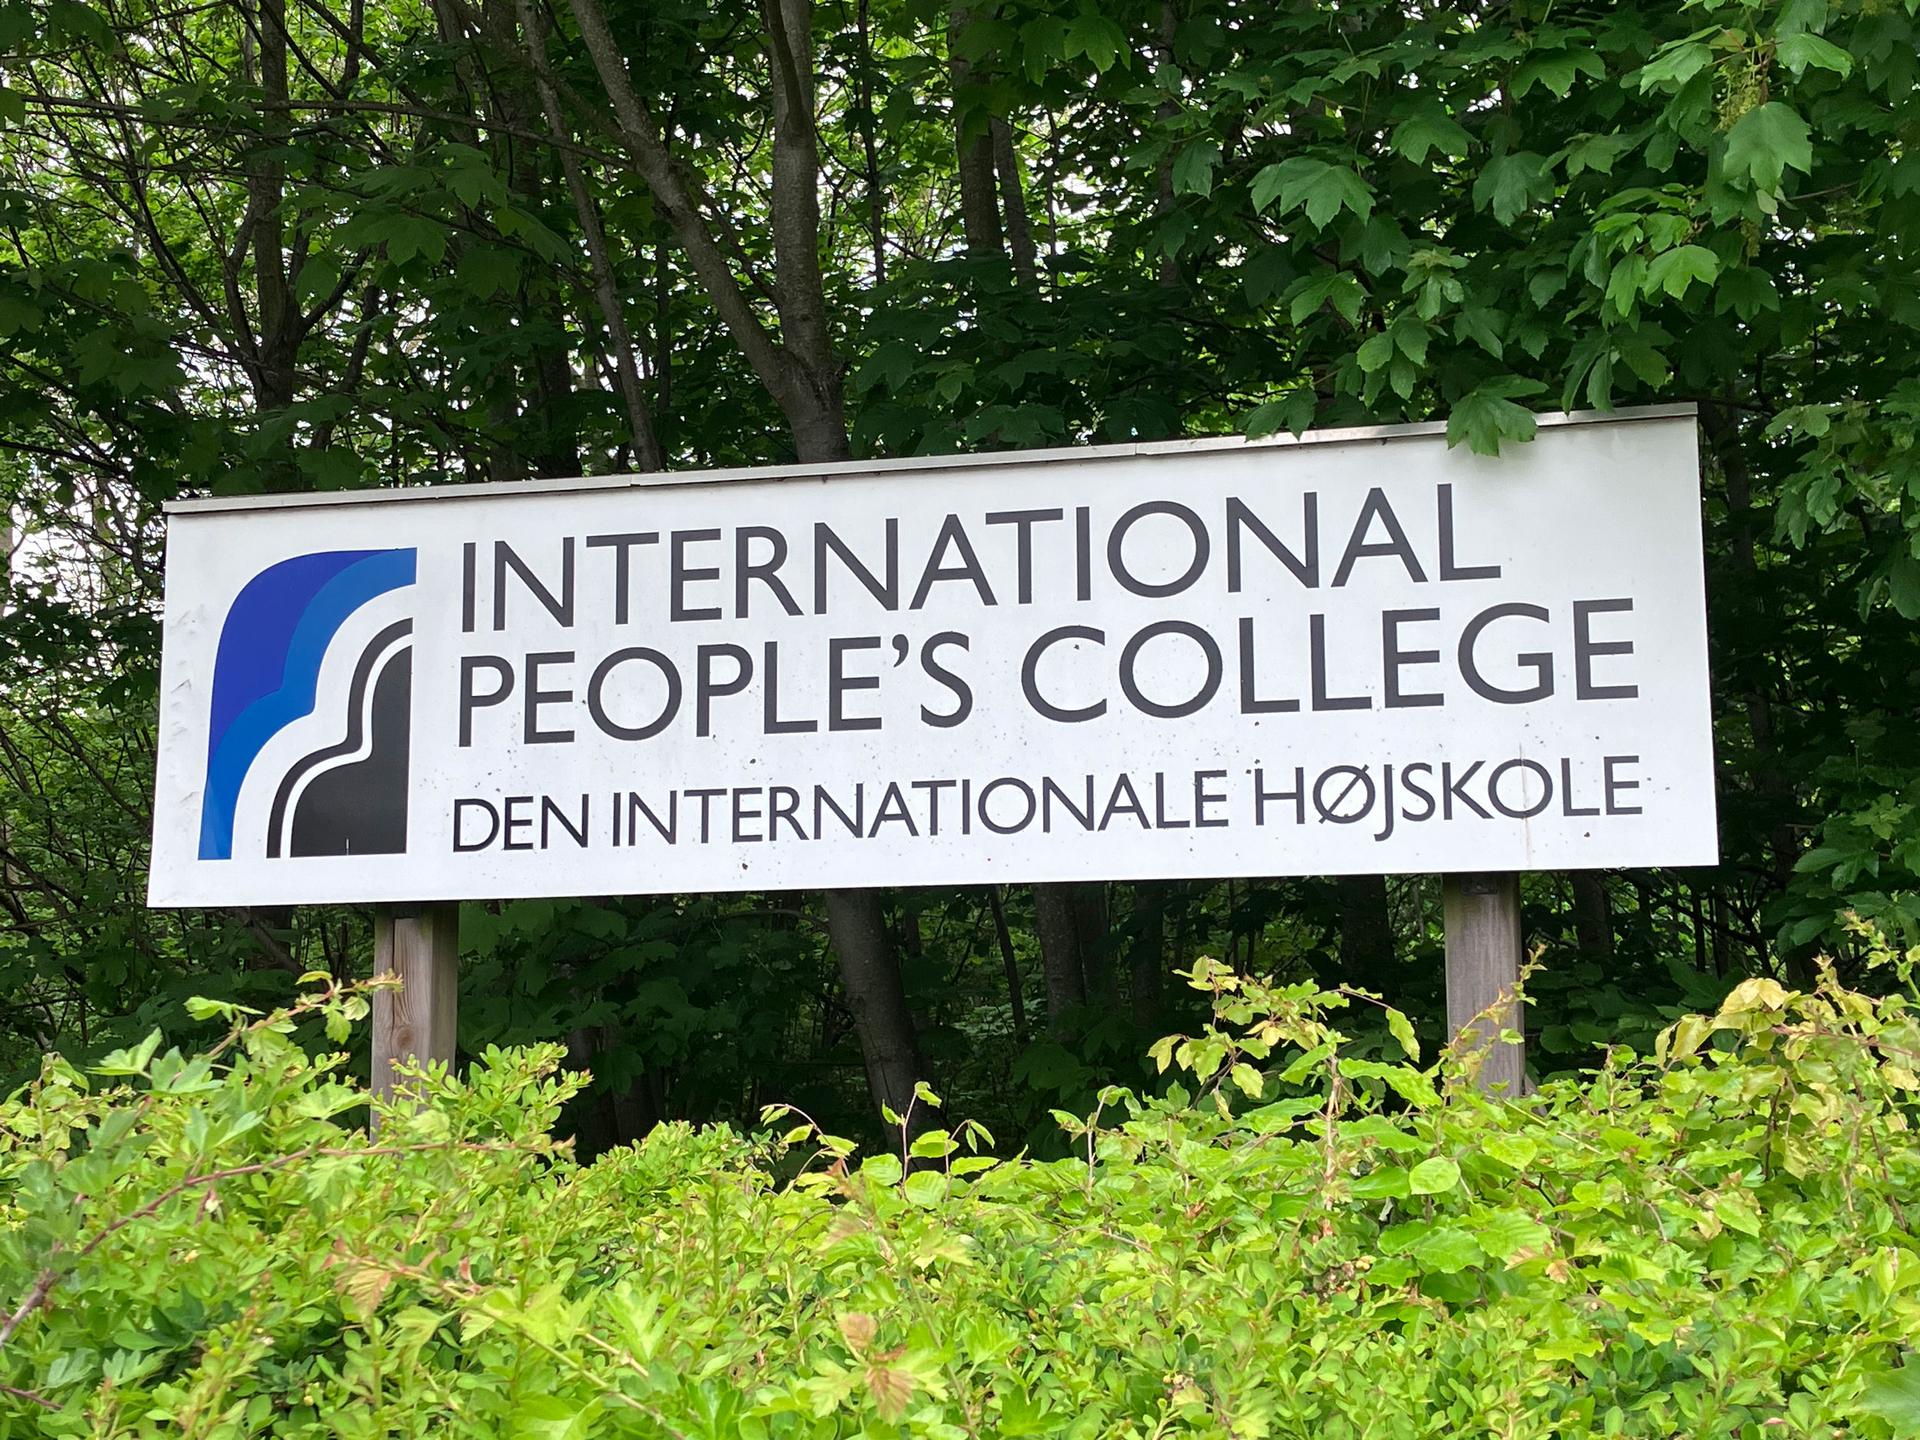 The International People's College hosts about 100 students from all over the world at any given time.